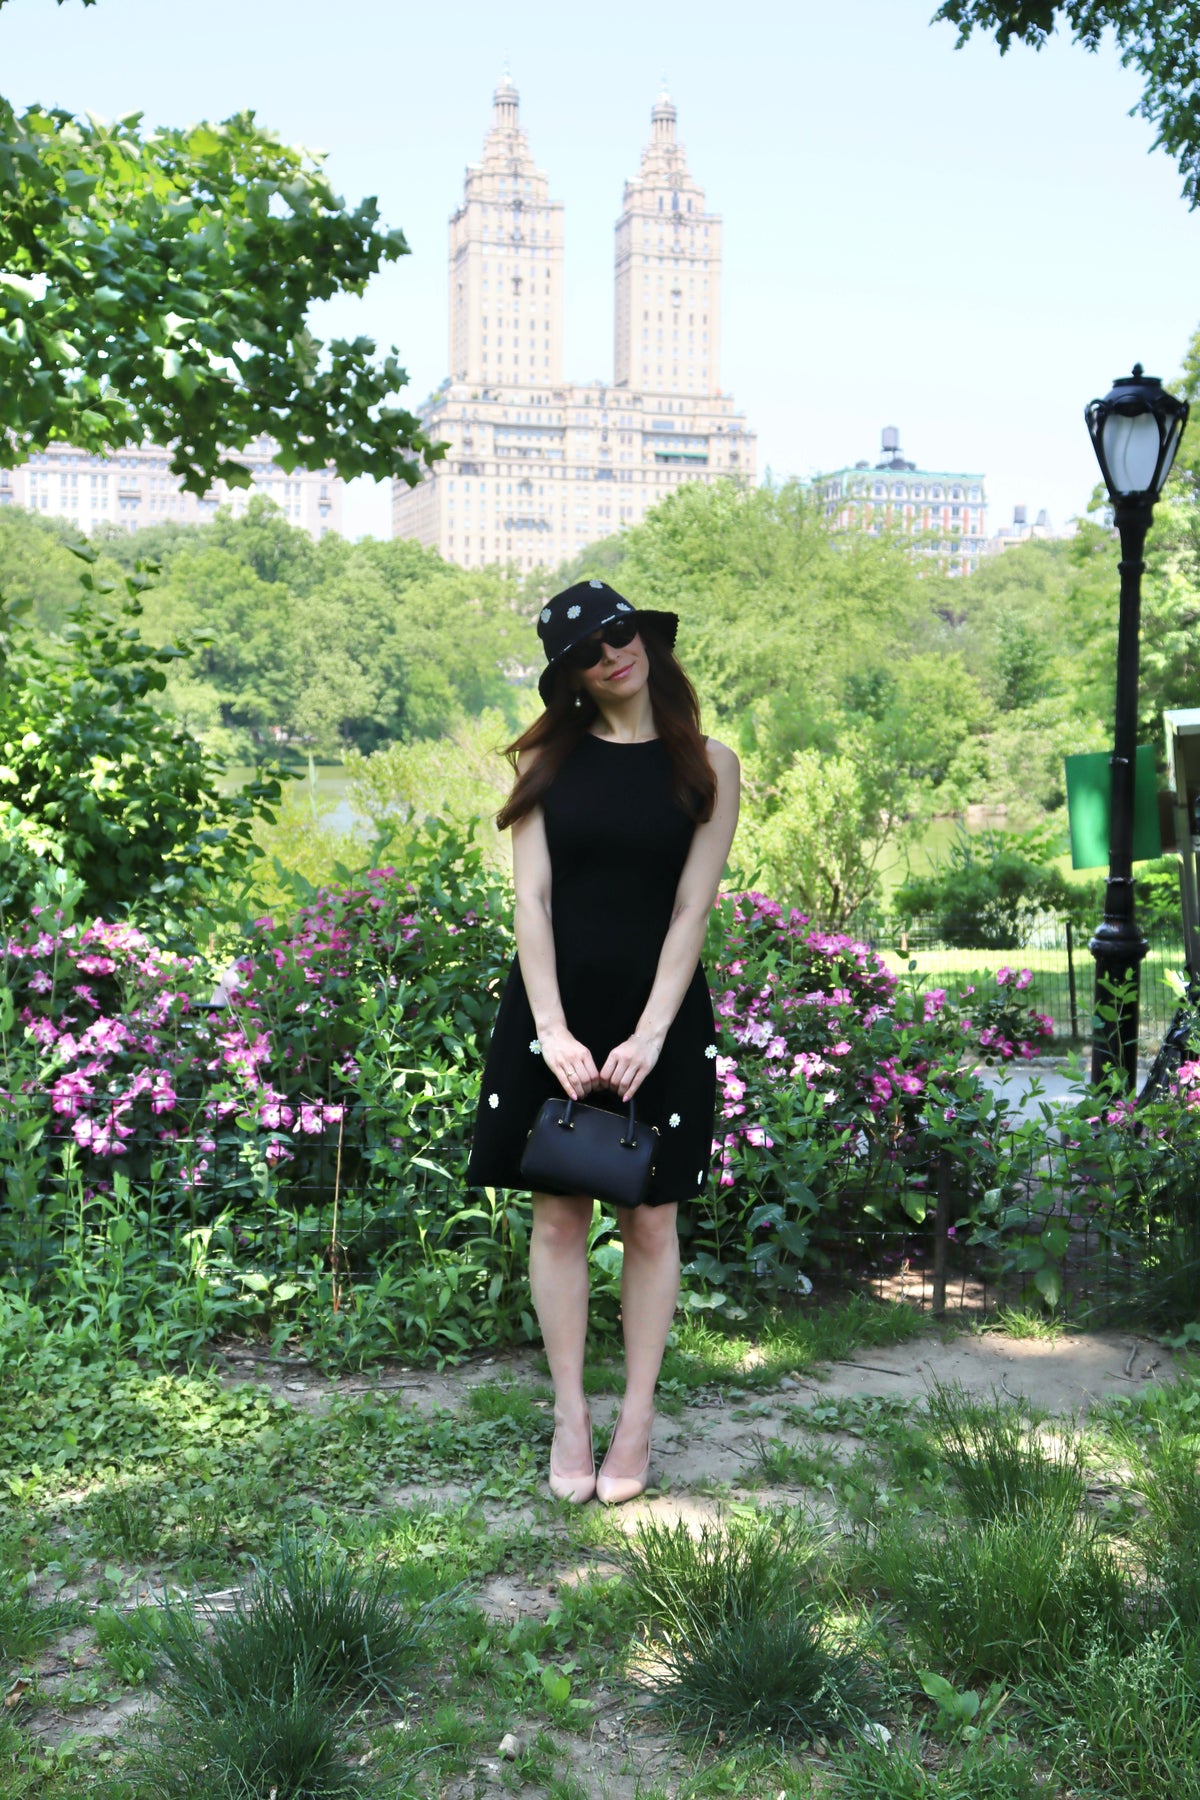 Model in a black dress with white daisy appliques and matching hat standing in front of pink flowers and a building.